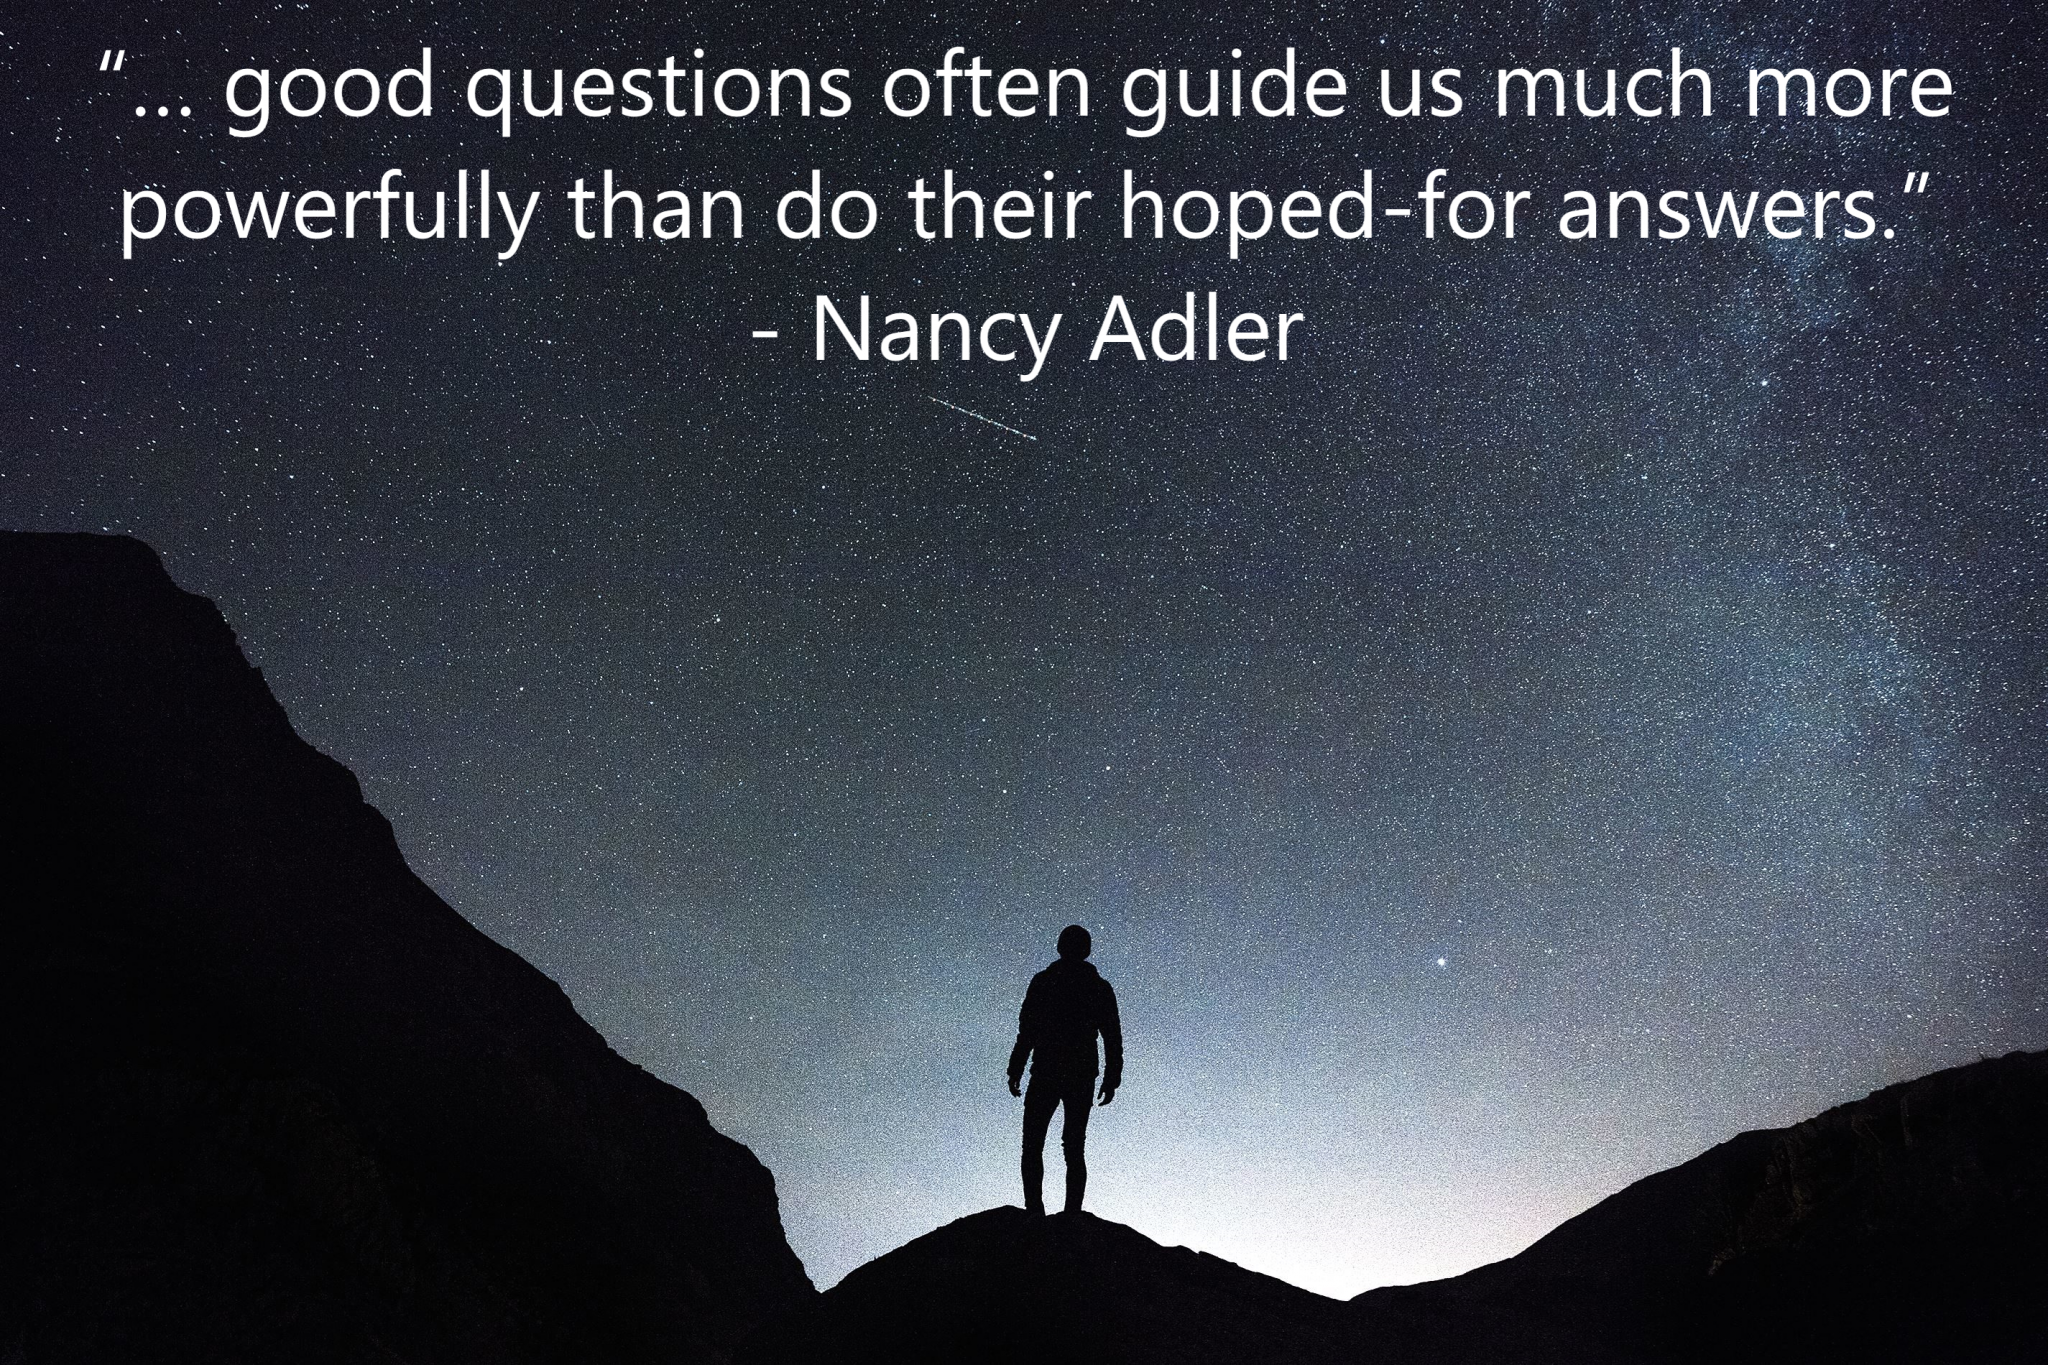 Guiding questions